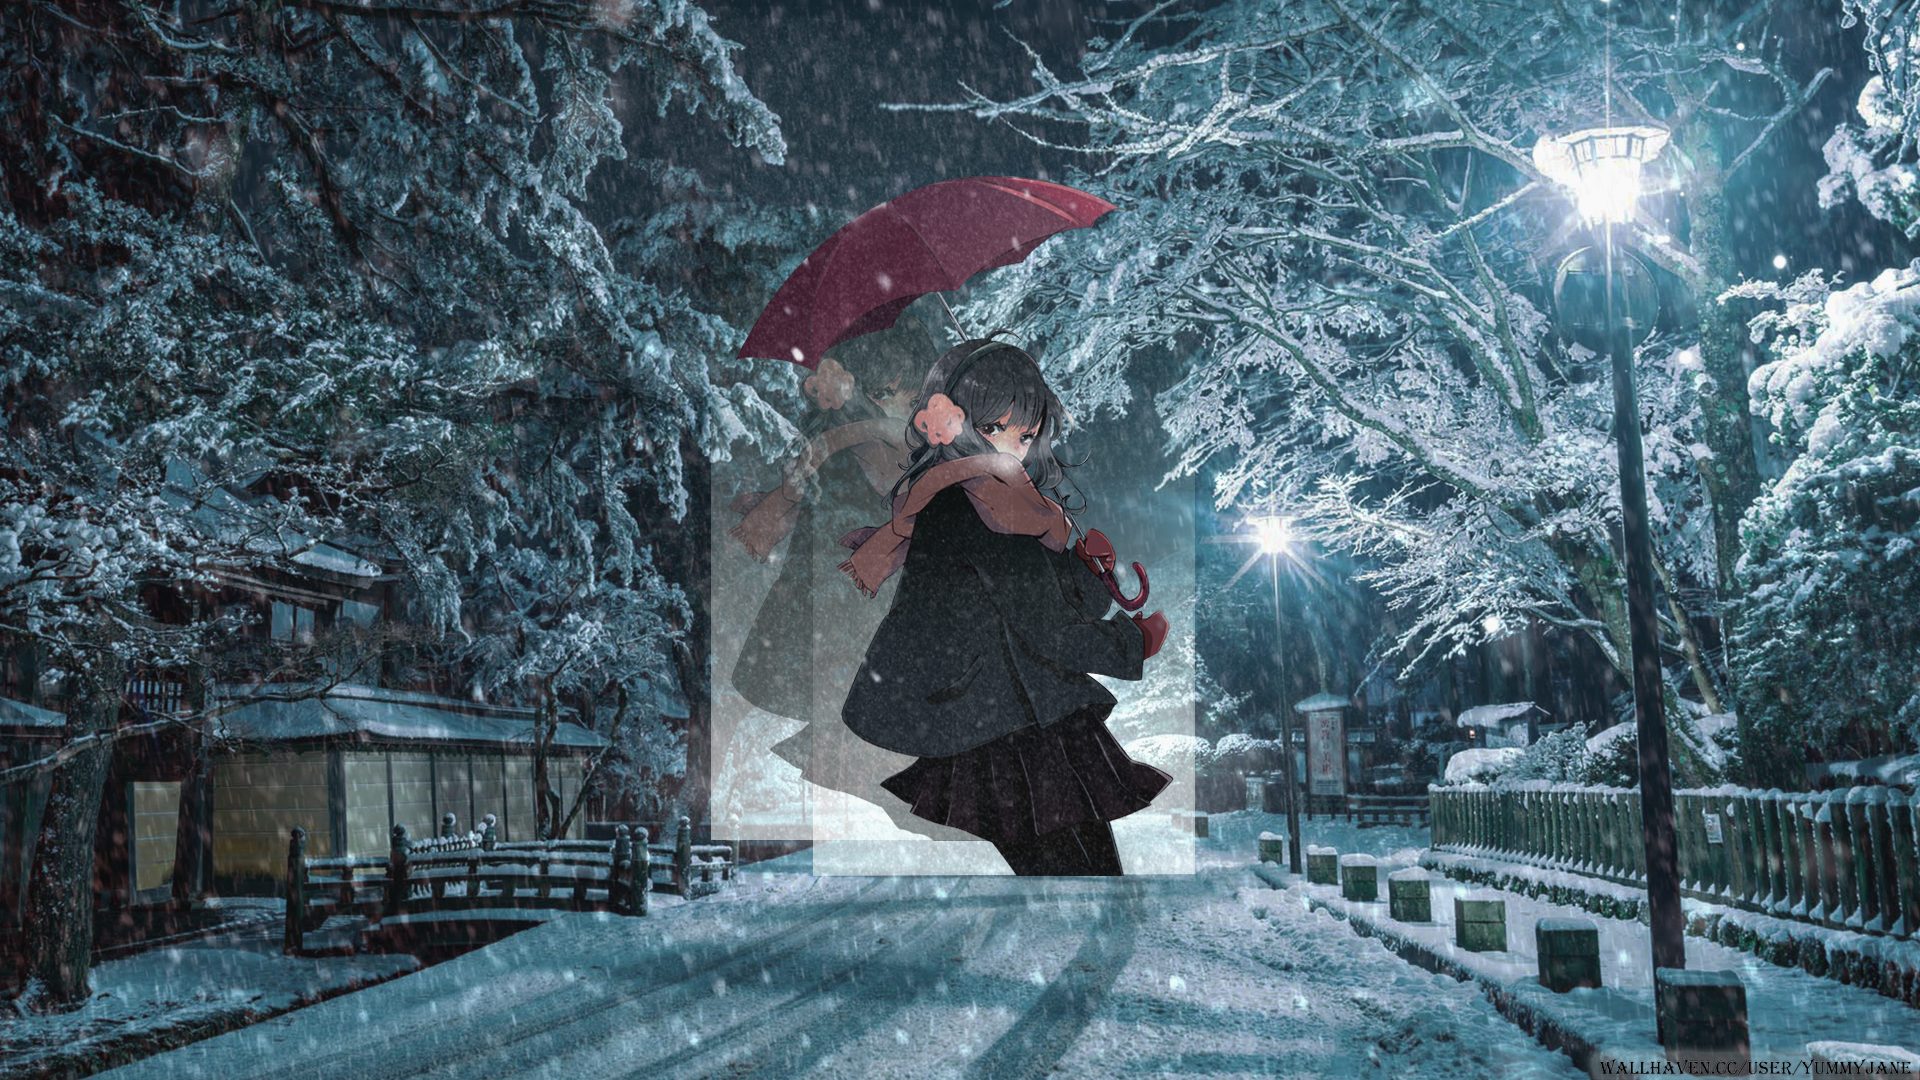 Picture In Picture Anime Anime Girls Winter Snow Night Umbrella Scarf 1920x1080